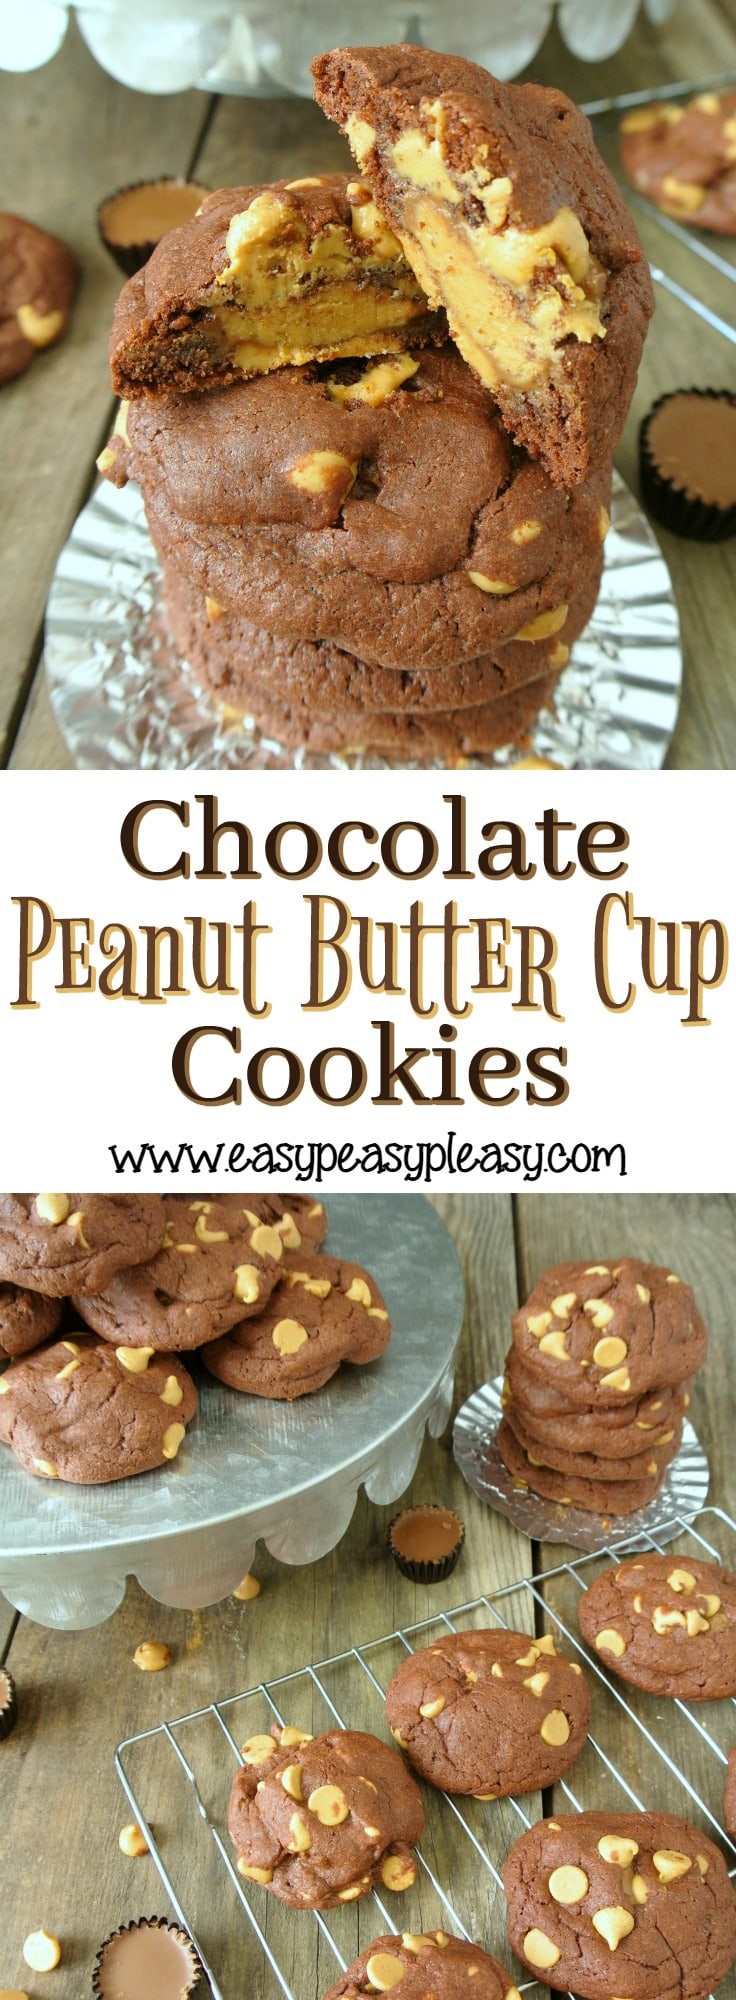 The easiest most delicious 5 ingredient Chocolate Peanut Butter Cup Cookies using a cake mix.